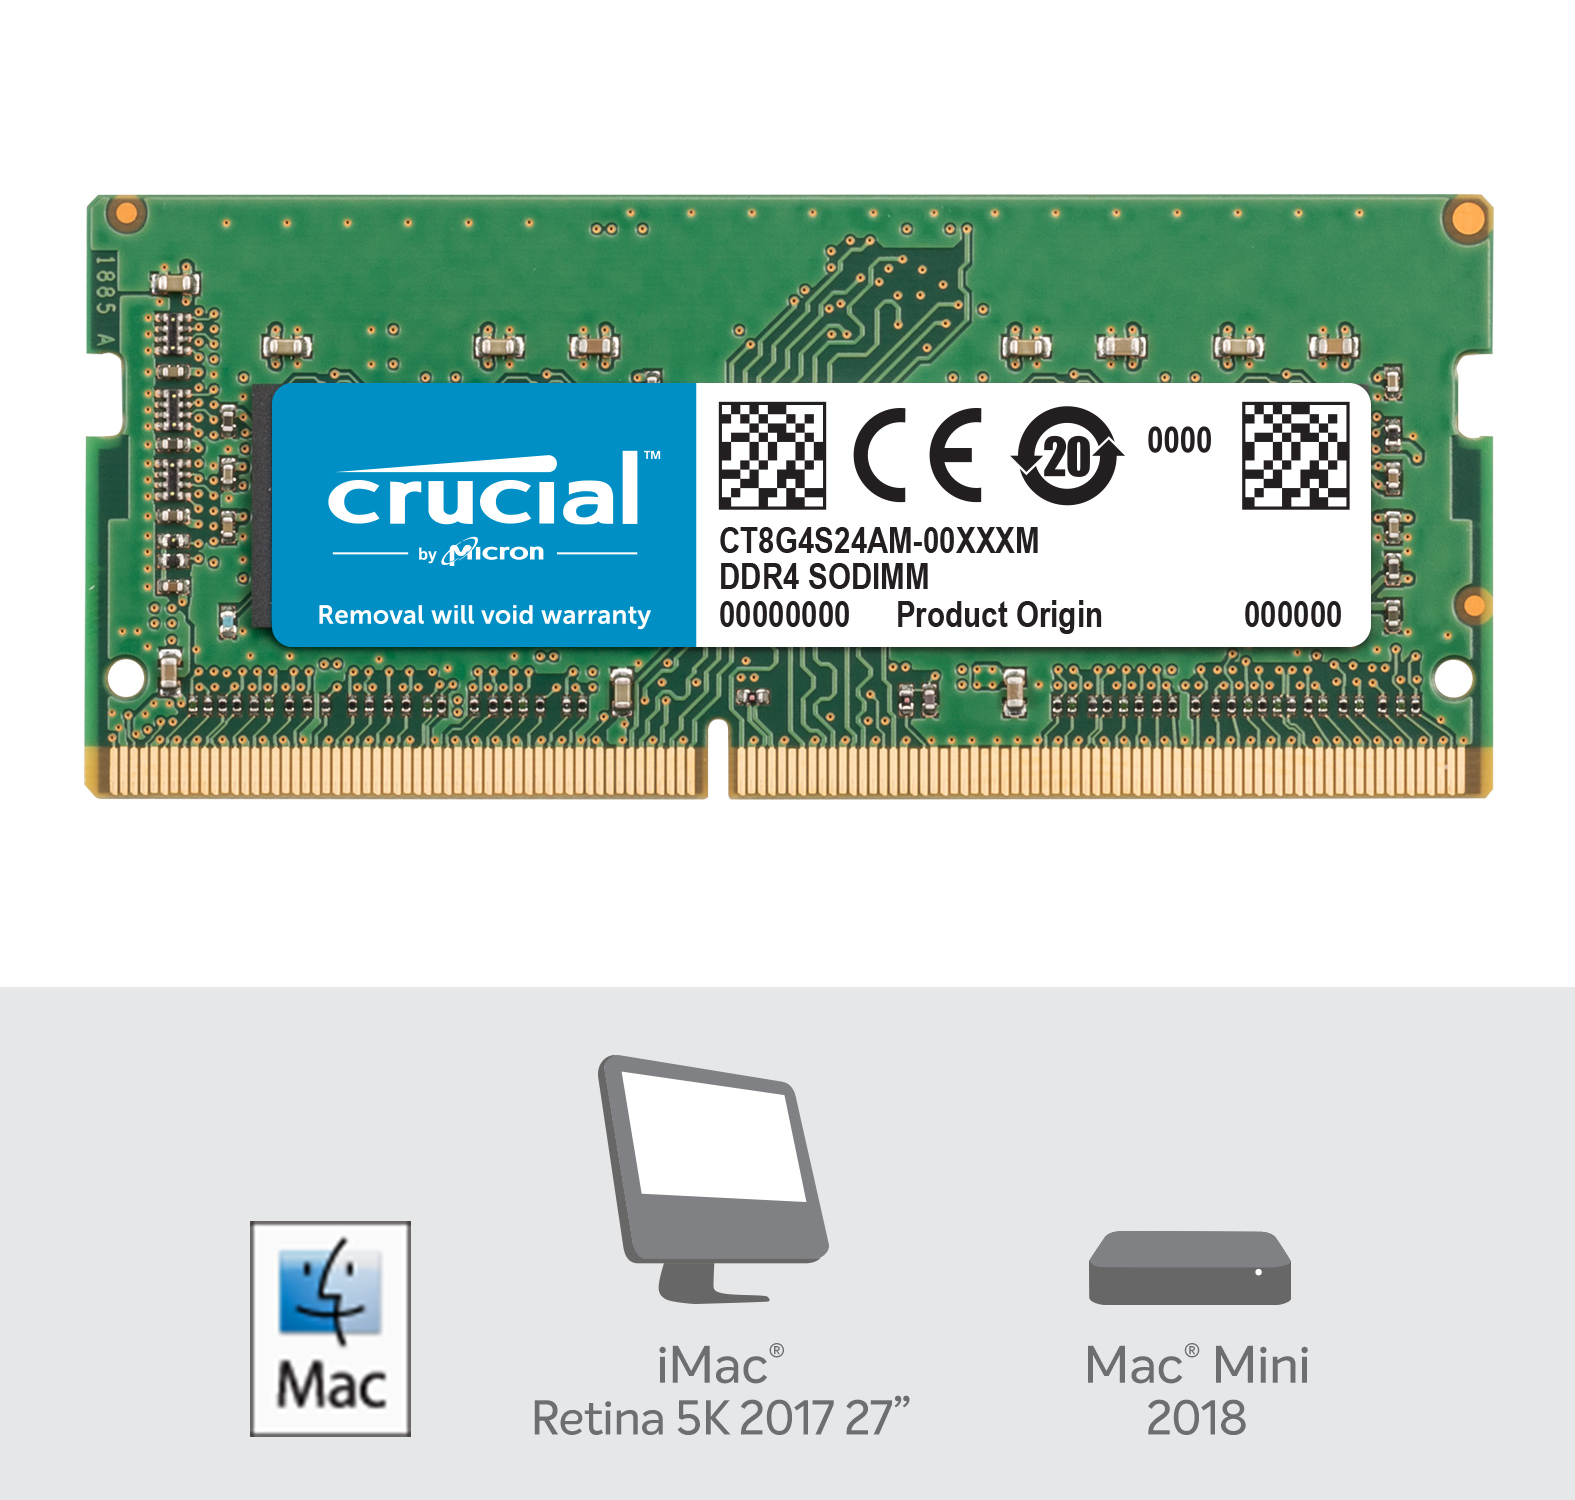 https://www.crucial.com/content/dam/crucial/dram-products/mac/images/compatibility/CT8G4S24AM-crucial-memory-for-mac-compatibility-image.jpg